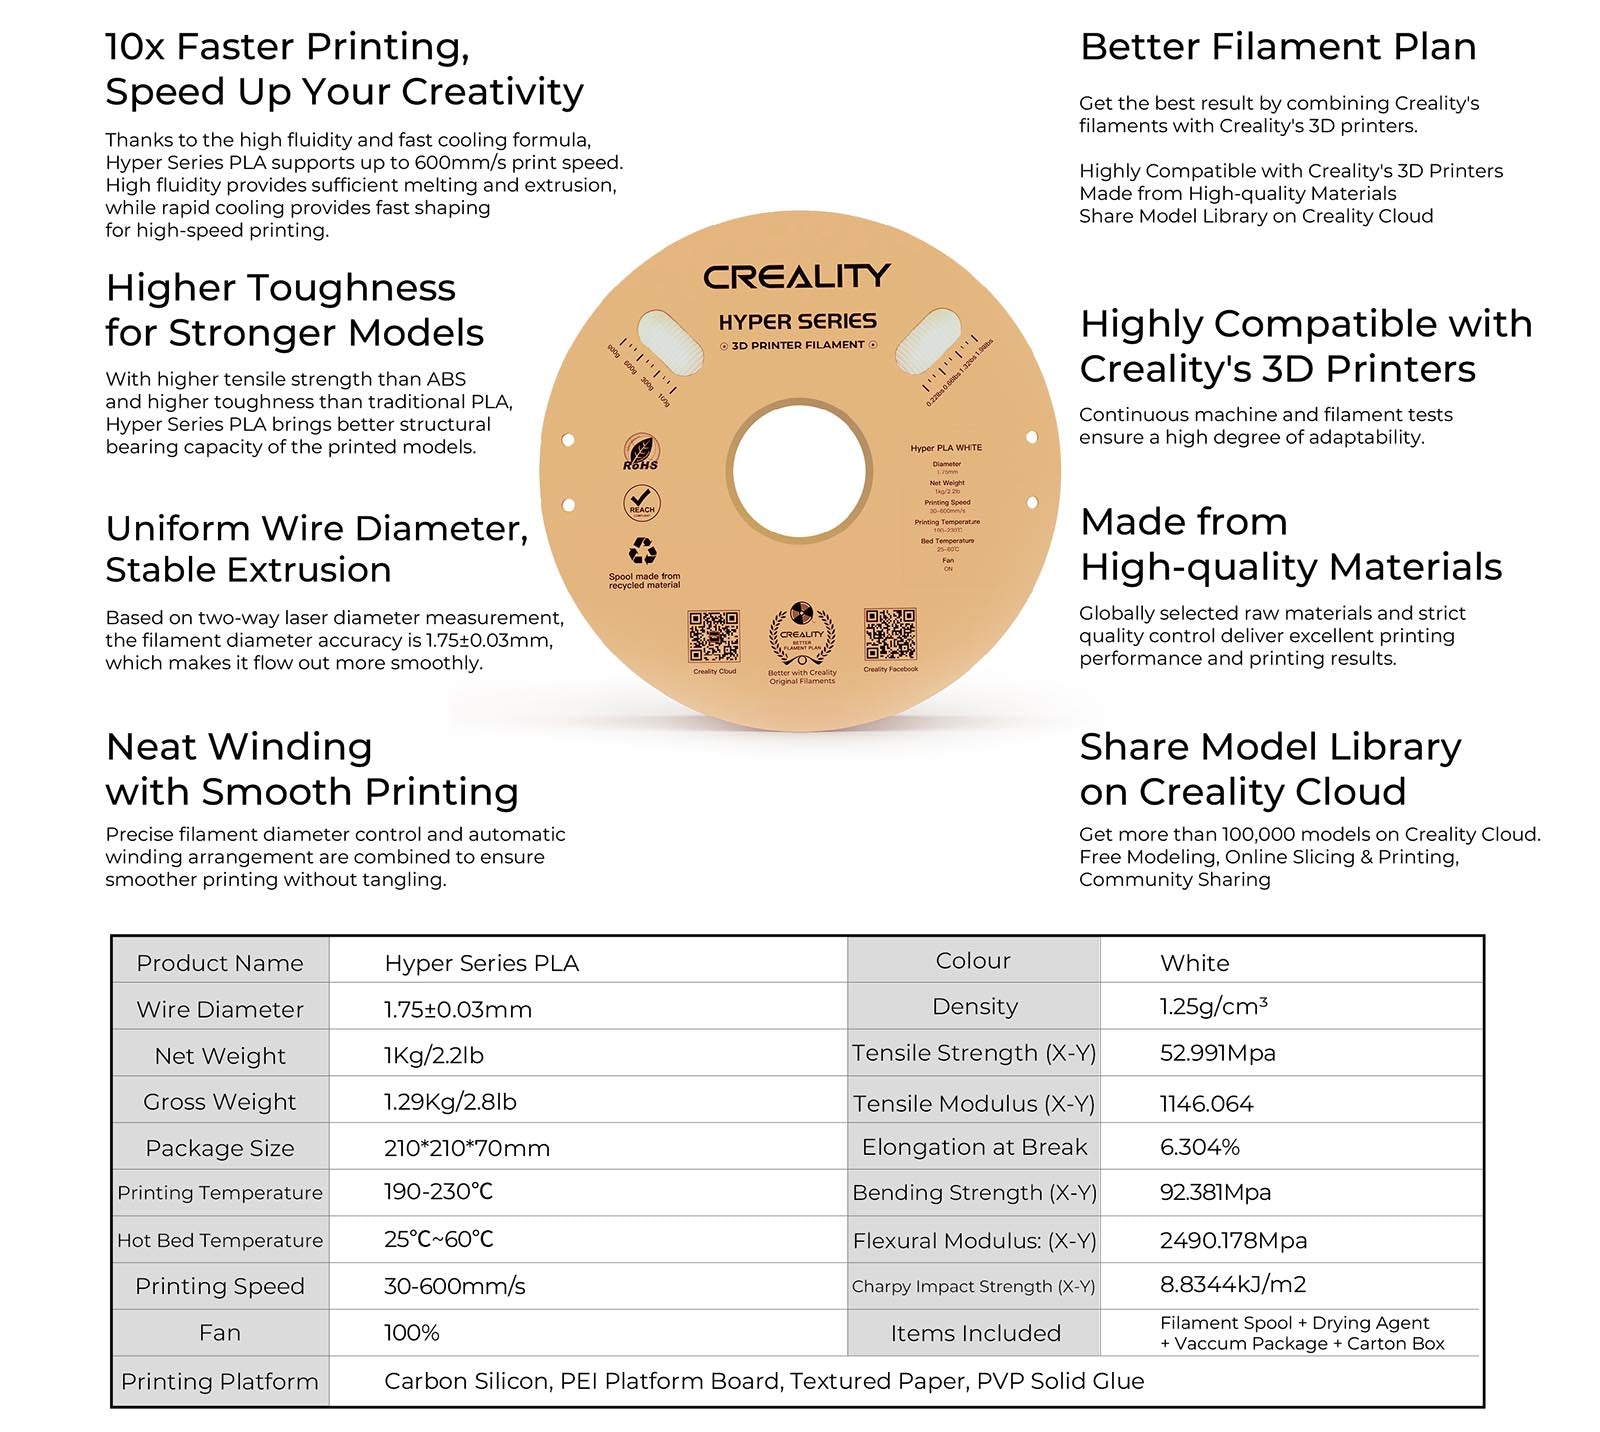 Creality Hyper Series PLA Specifications - High Speed Filament for Klipper Firmware 3D Printers